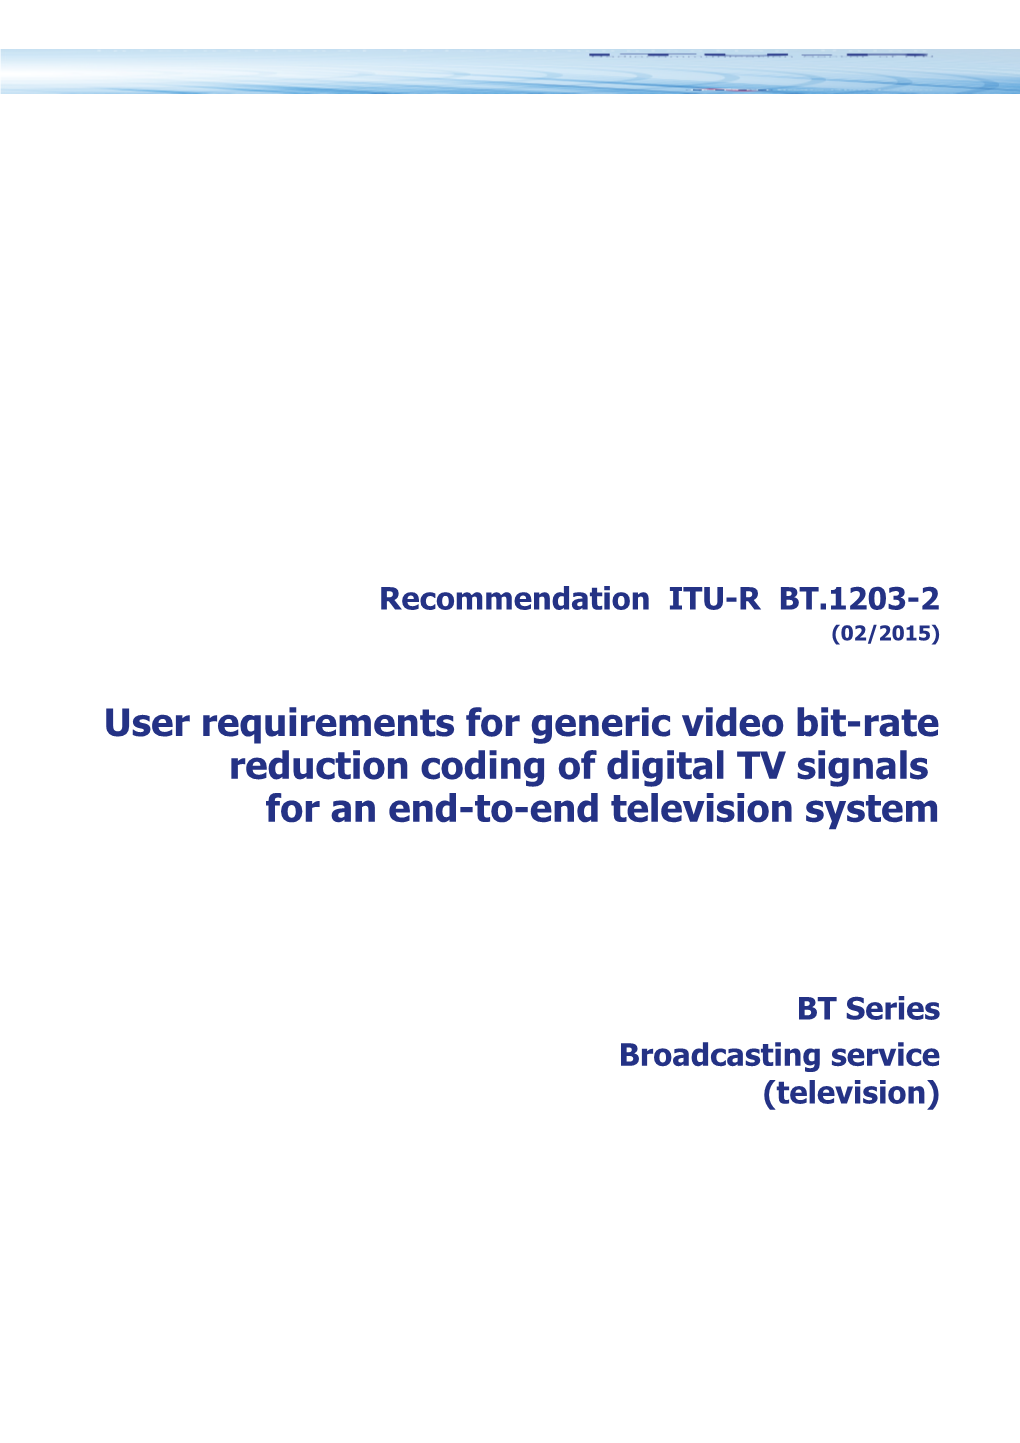 RECOMMENDATION ITU-R BT.1203-2 - User Requirements for Generic Video Bit-Rate Reduction